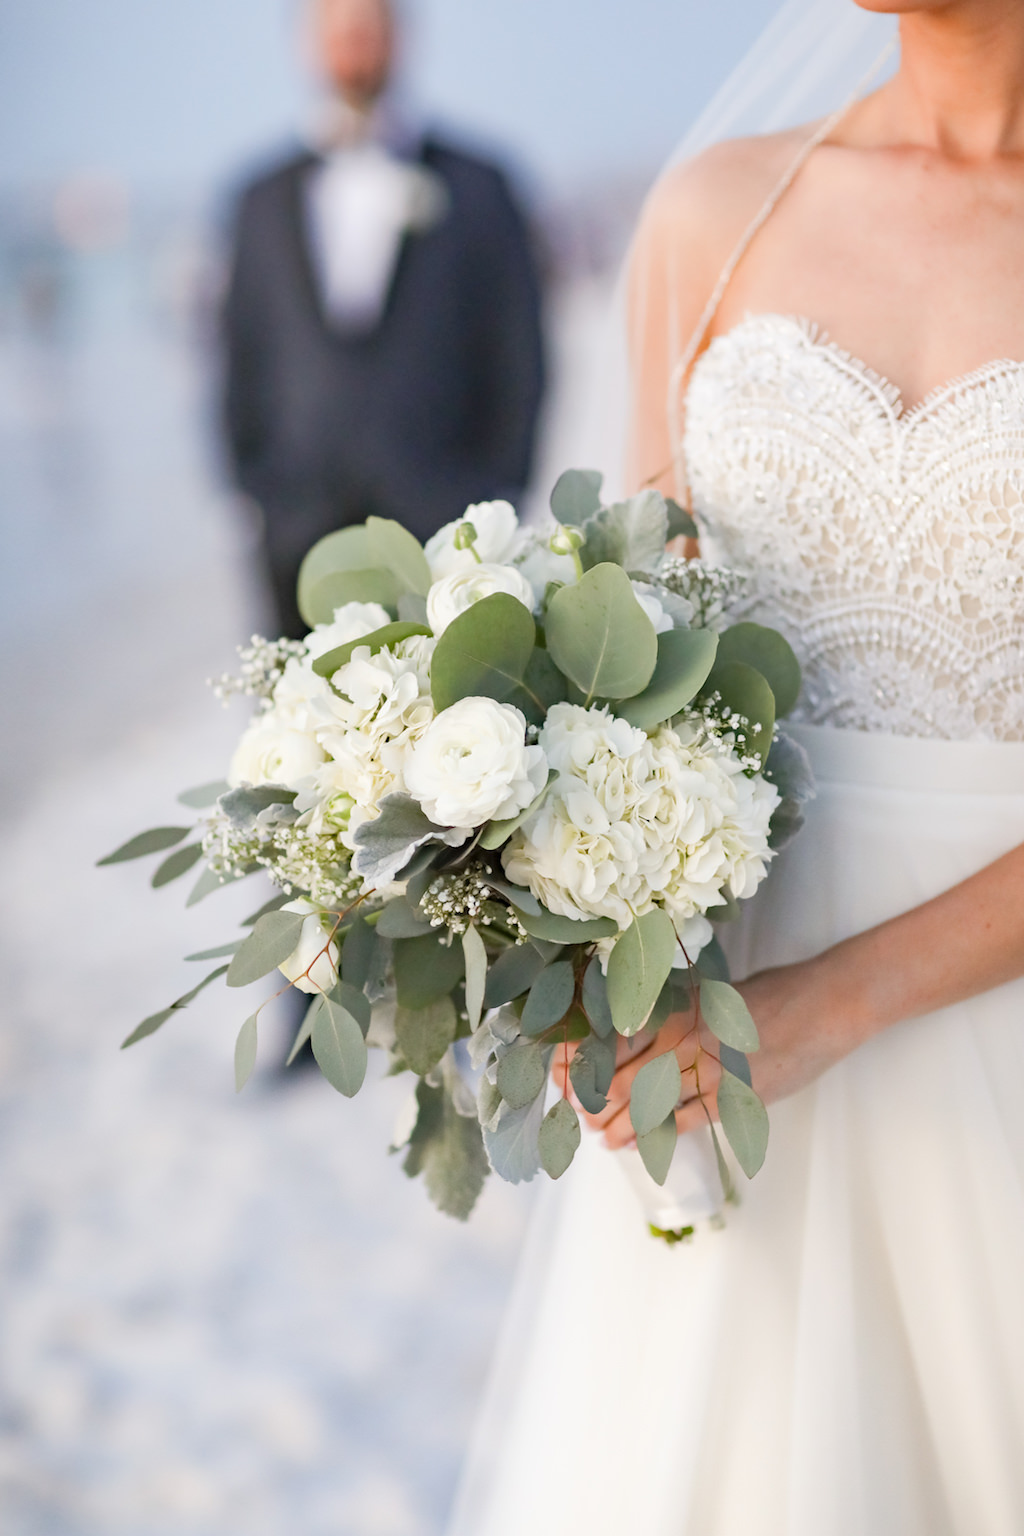 Outdoor Beach Wedding Portrait, Bride in Lace and Beaded Ivory Bodice Wtoo Bridal Strapless Dress with White Floral and Greenery Bouquet | Tampa Bay Wedding Photographer Lifelong Studios Photography